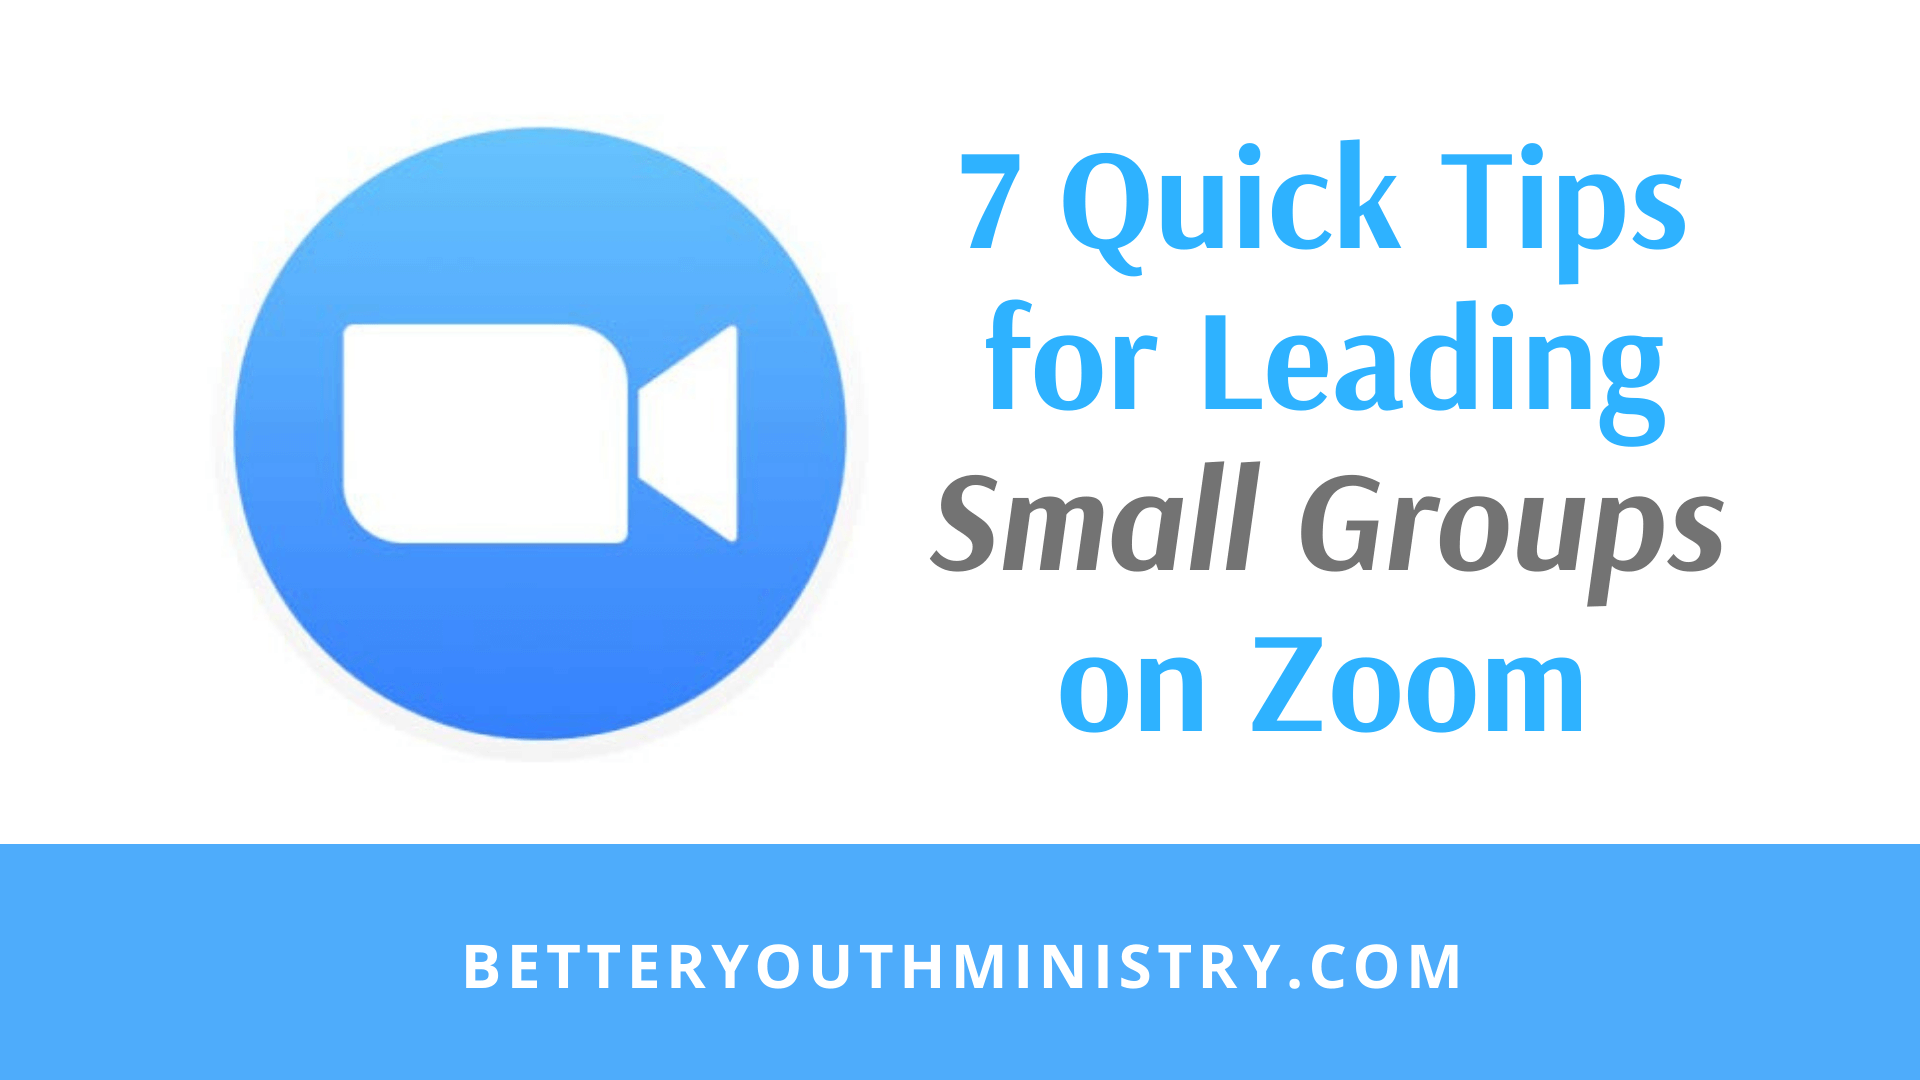 7 Quick Tips for Leading Small Groups on Zoom